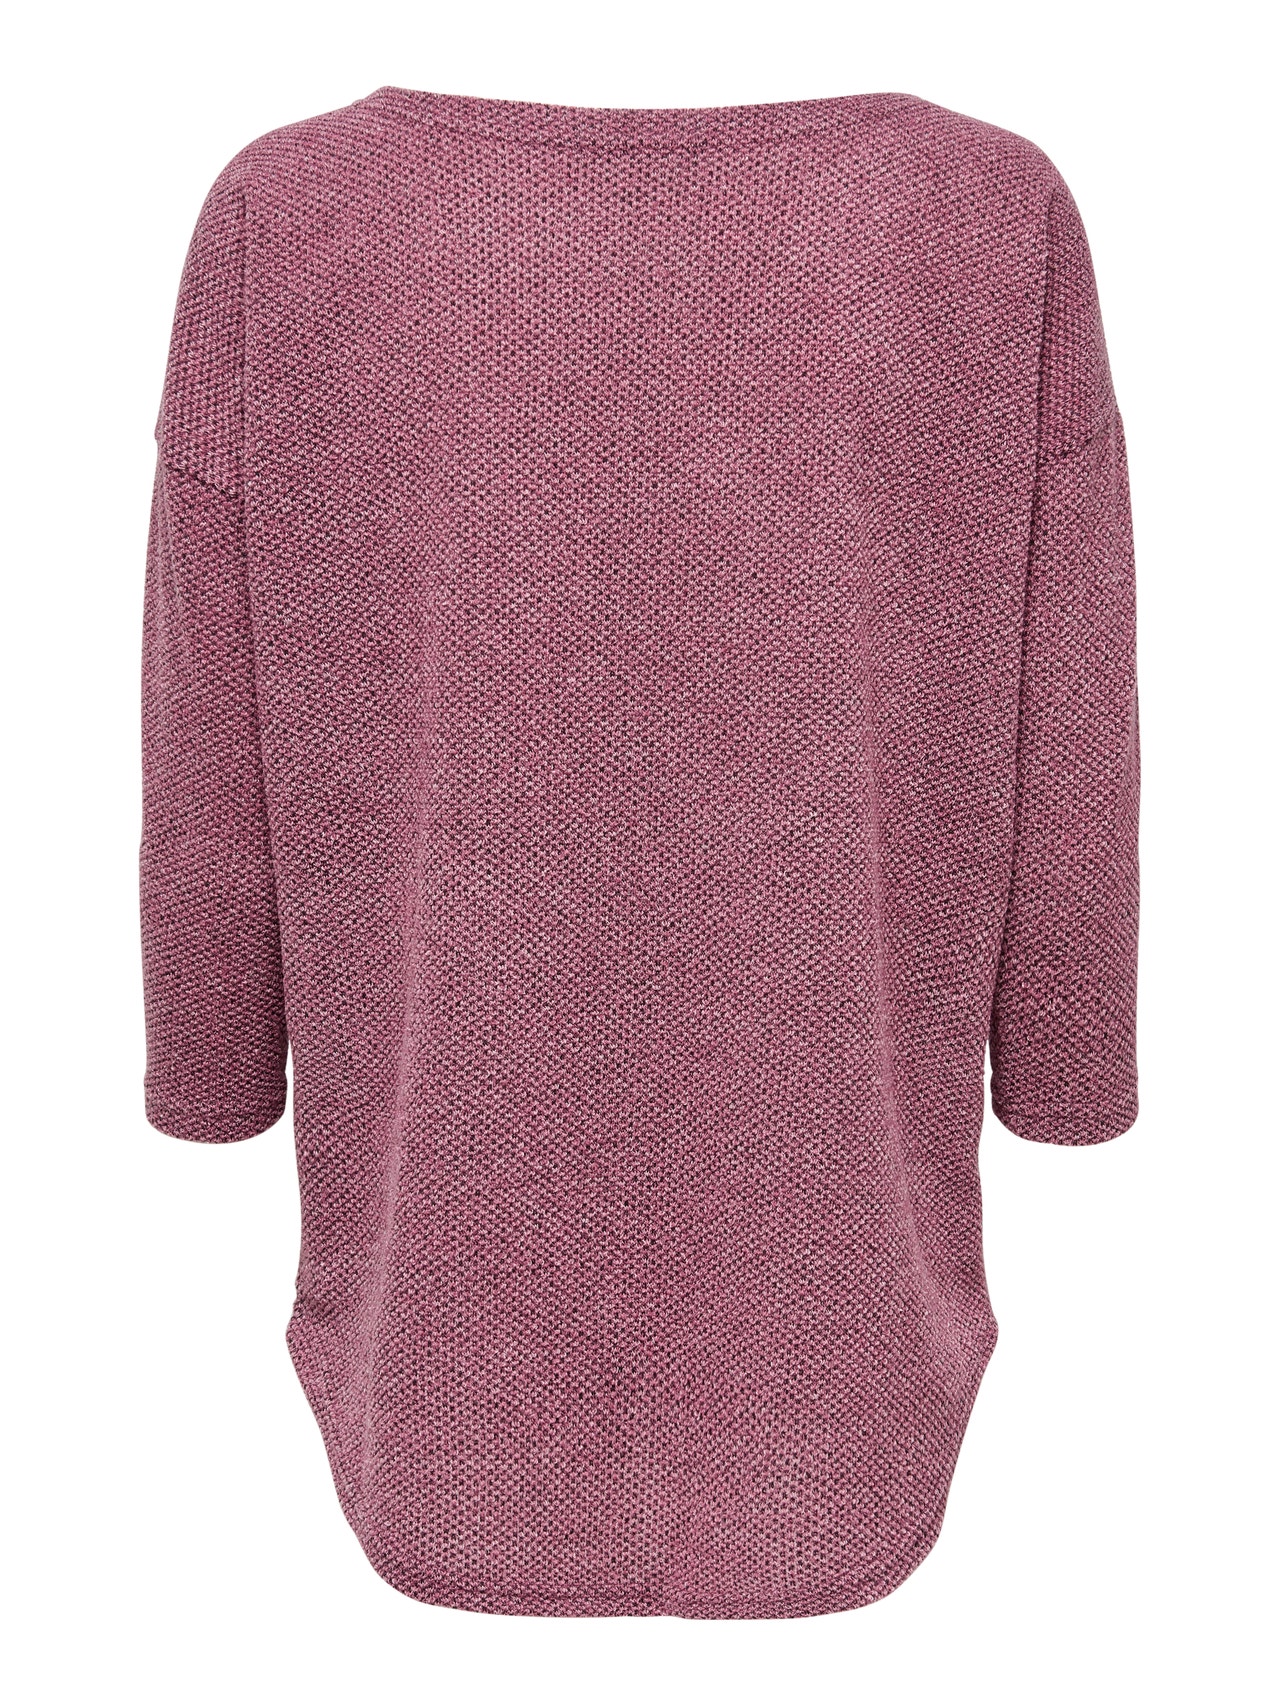 ONLY Oversize 3/4 sleeved top -Dry Rose - 15177776